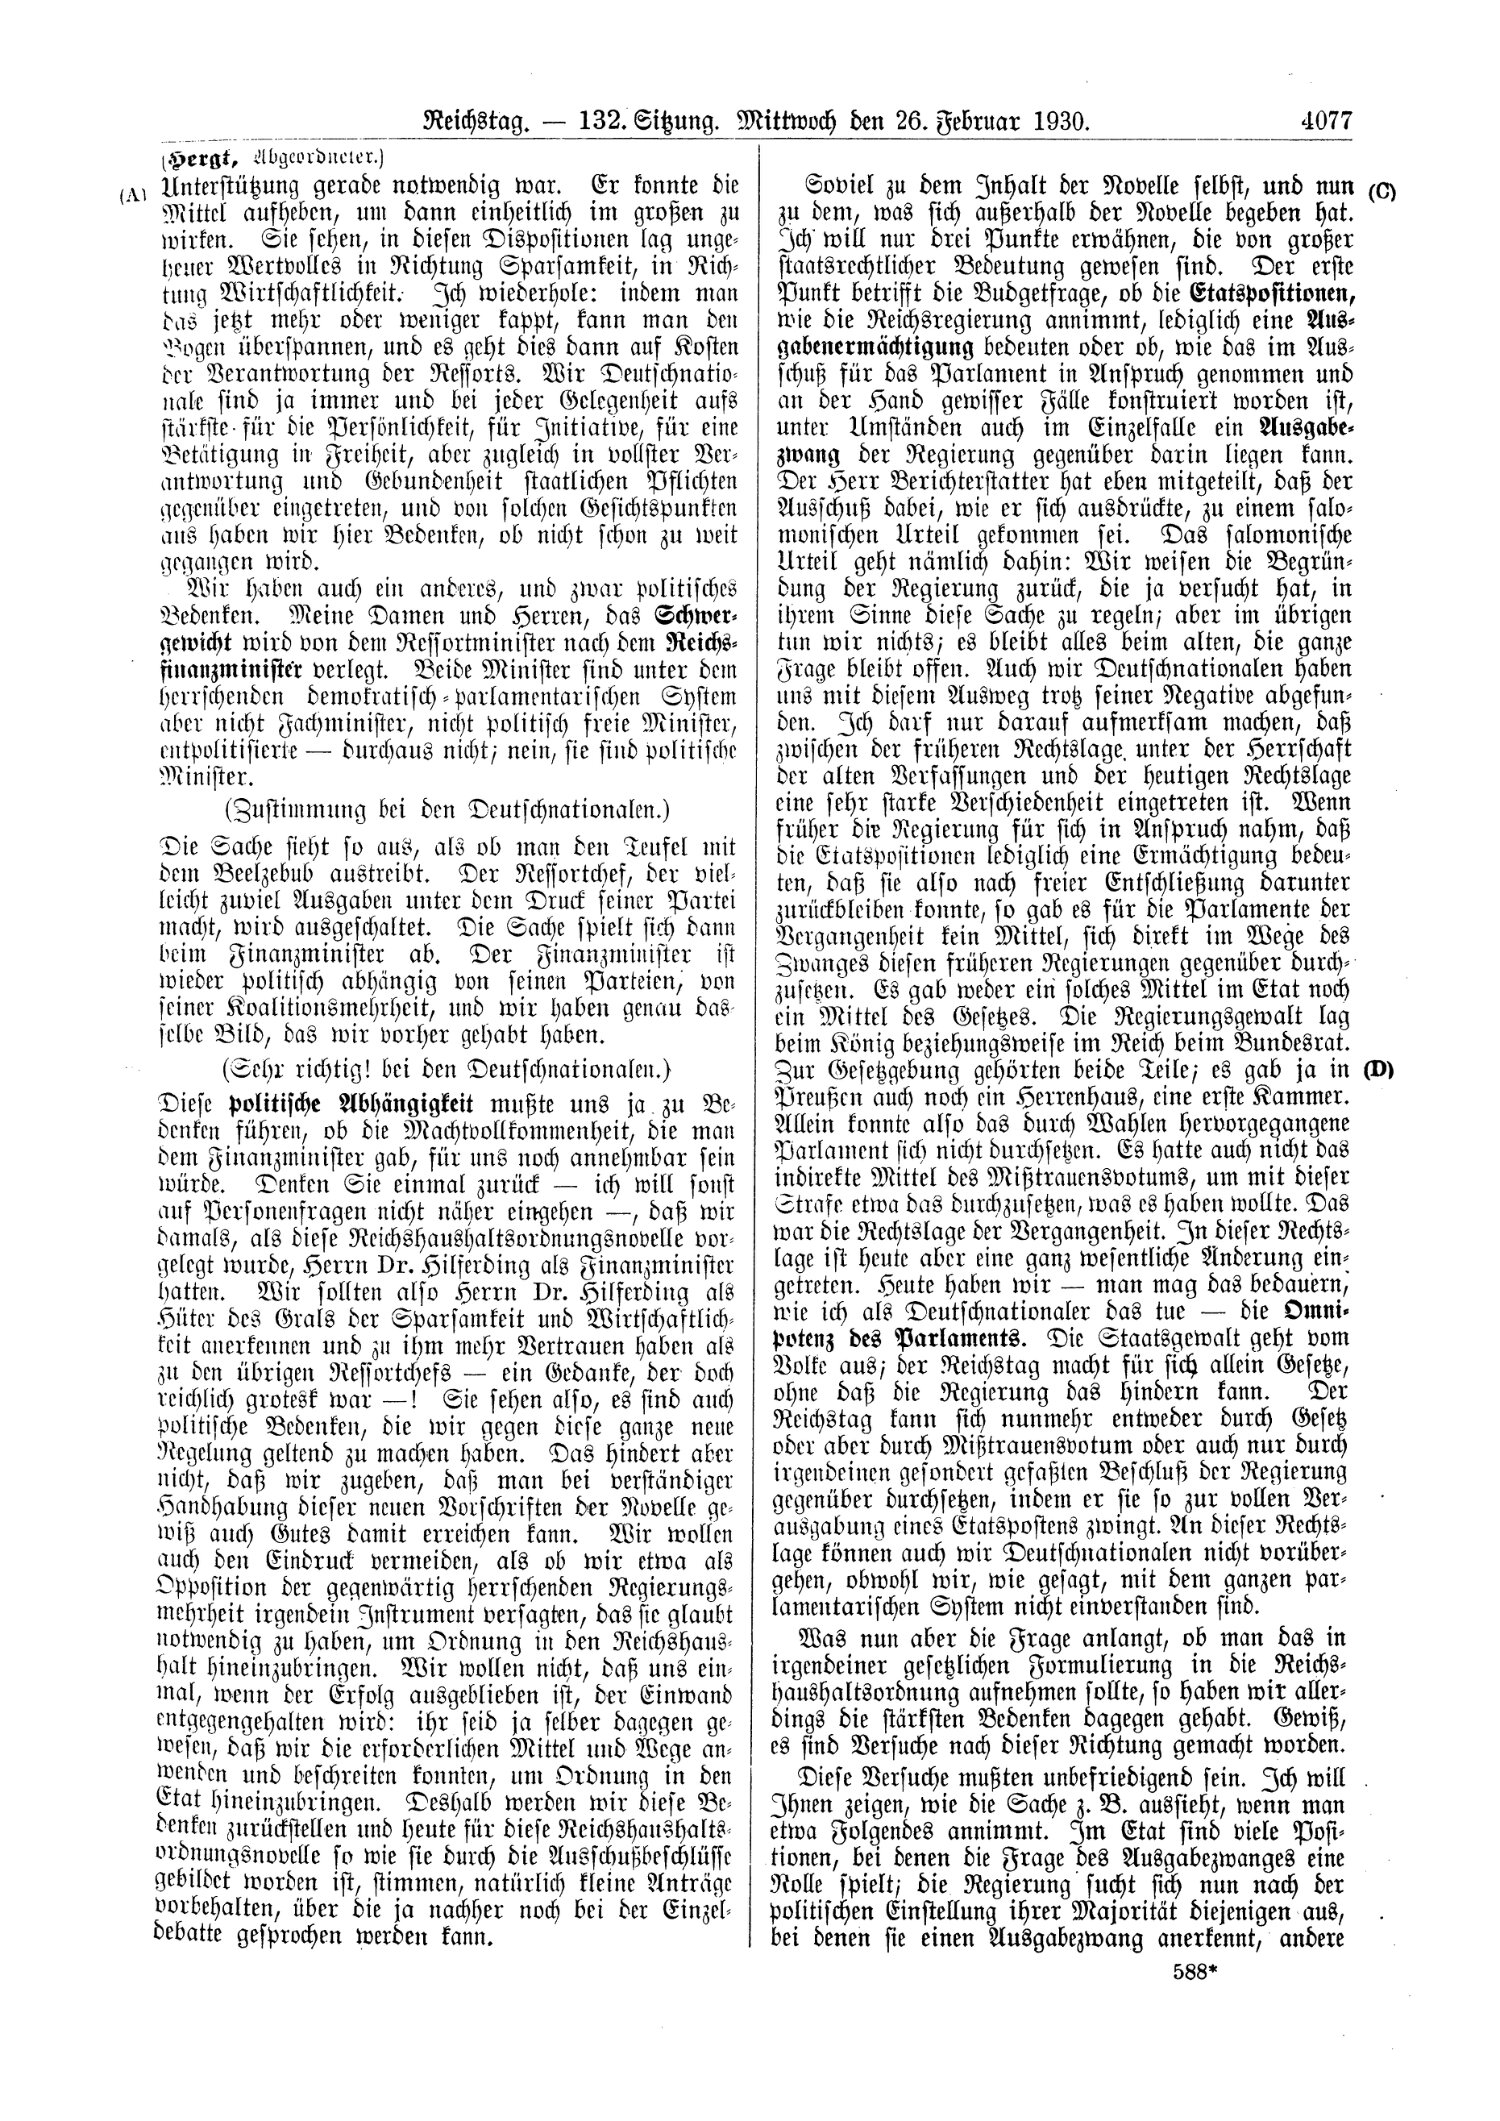 Scan of page 4077